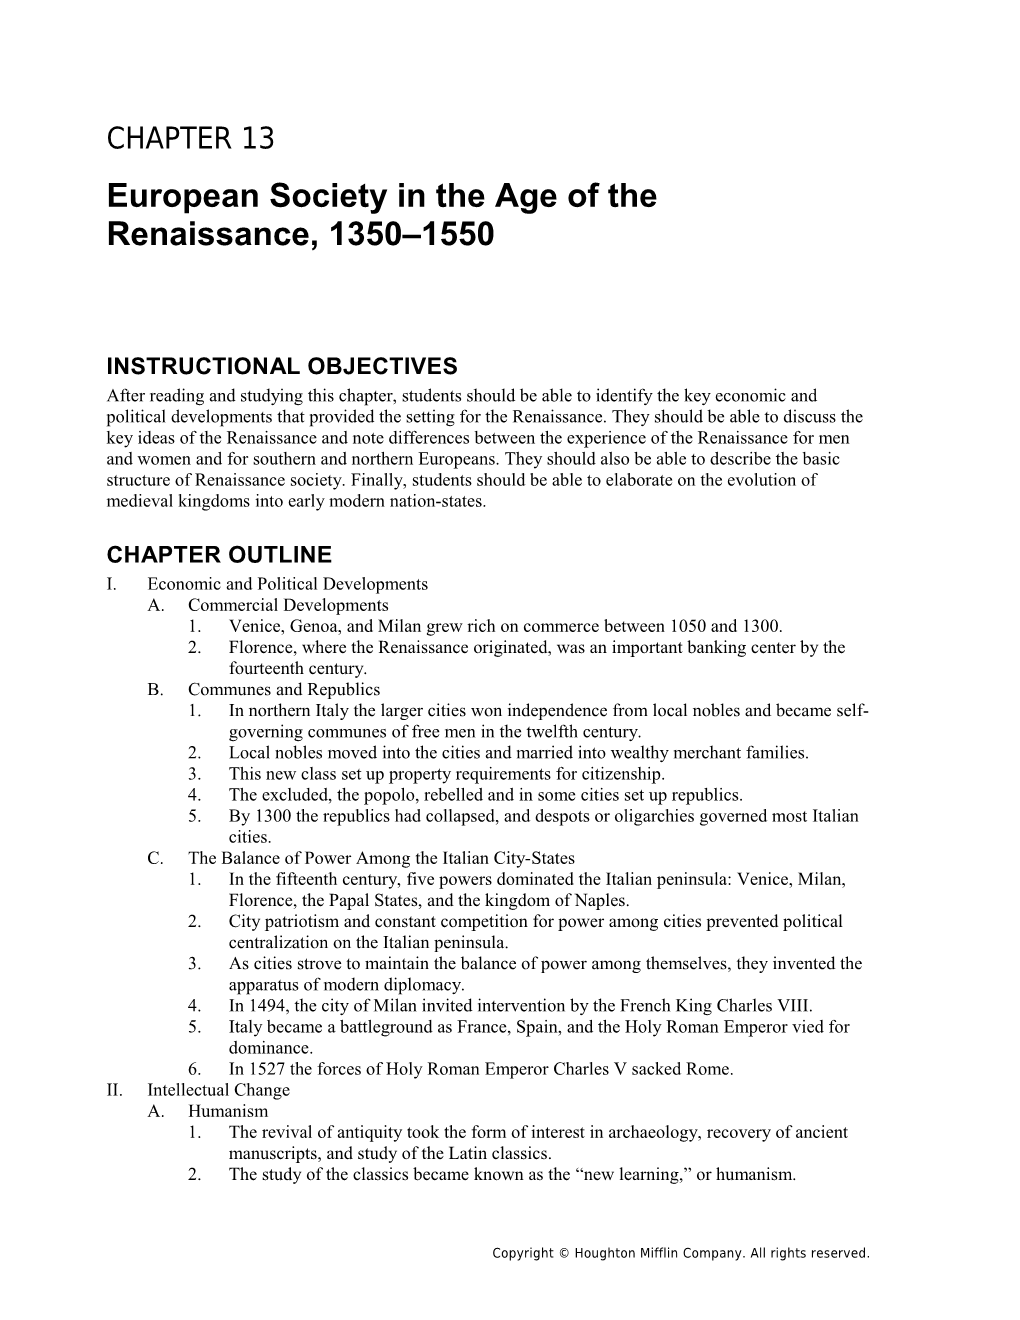 European Society in the Age of the Renaissance, 1350 1550